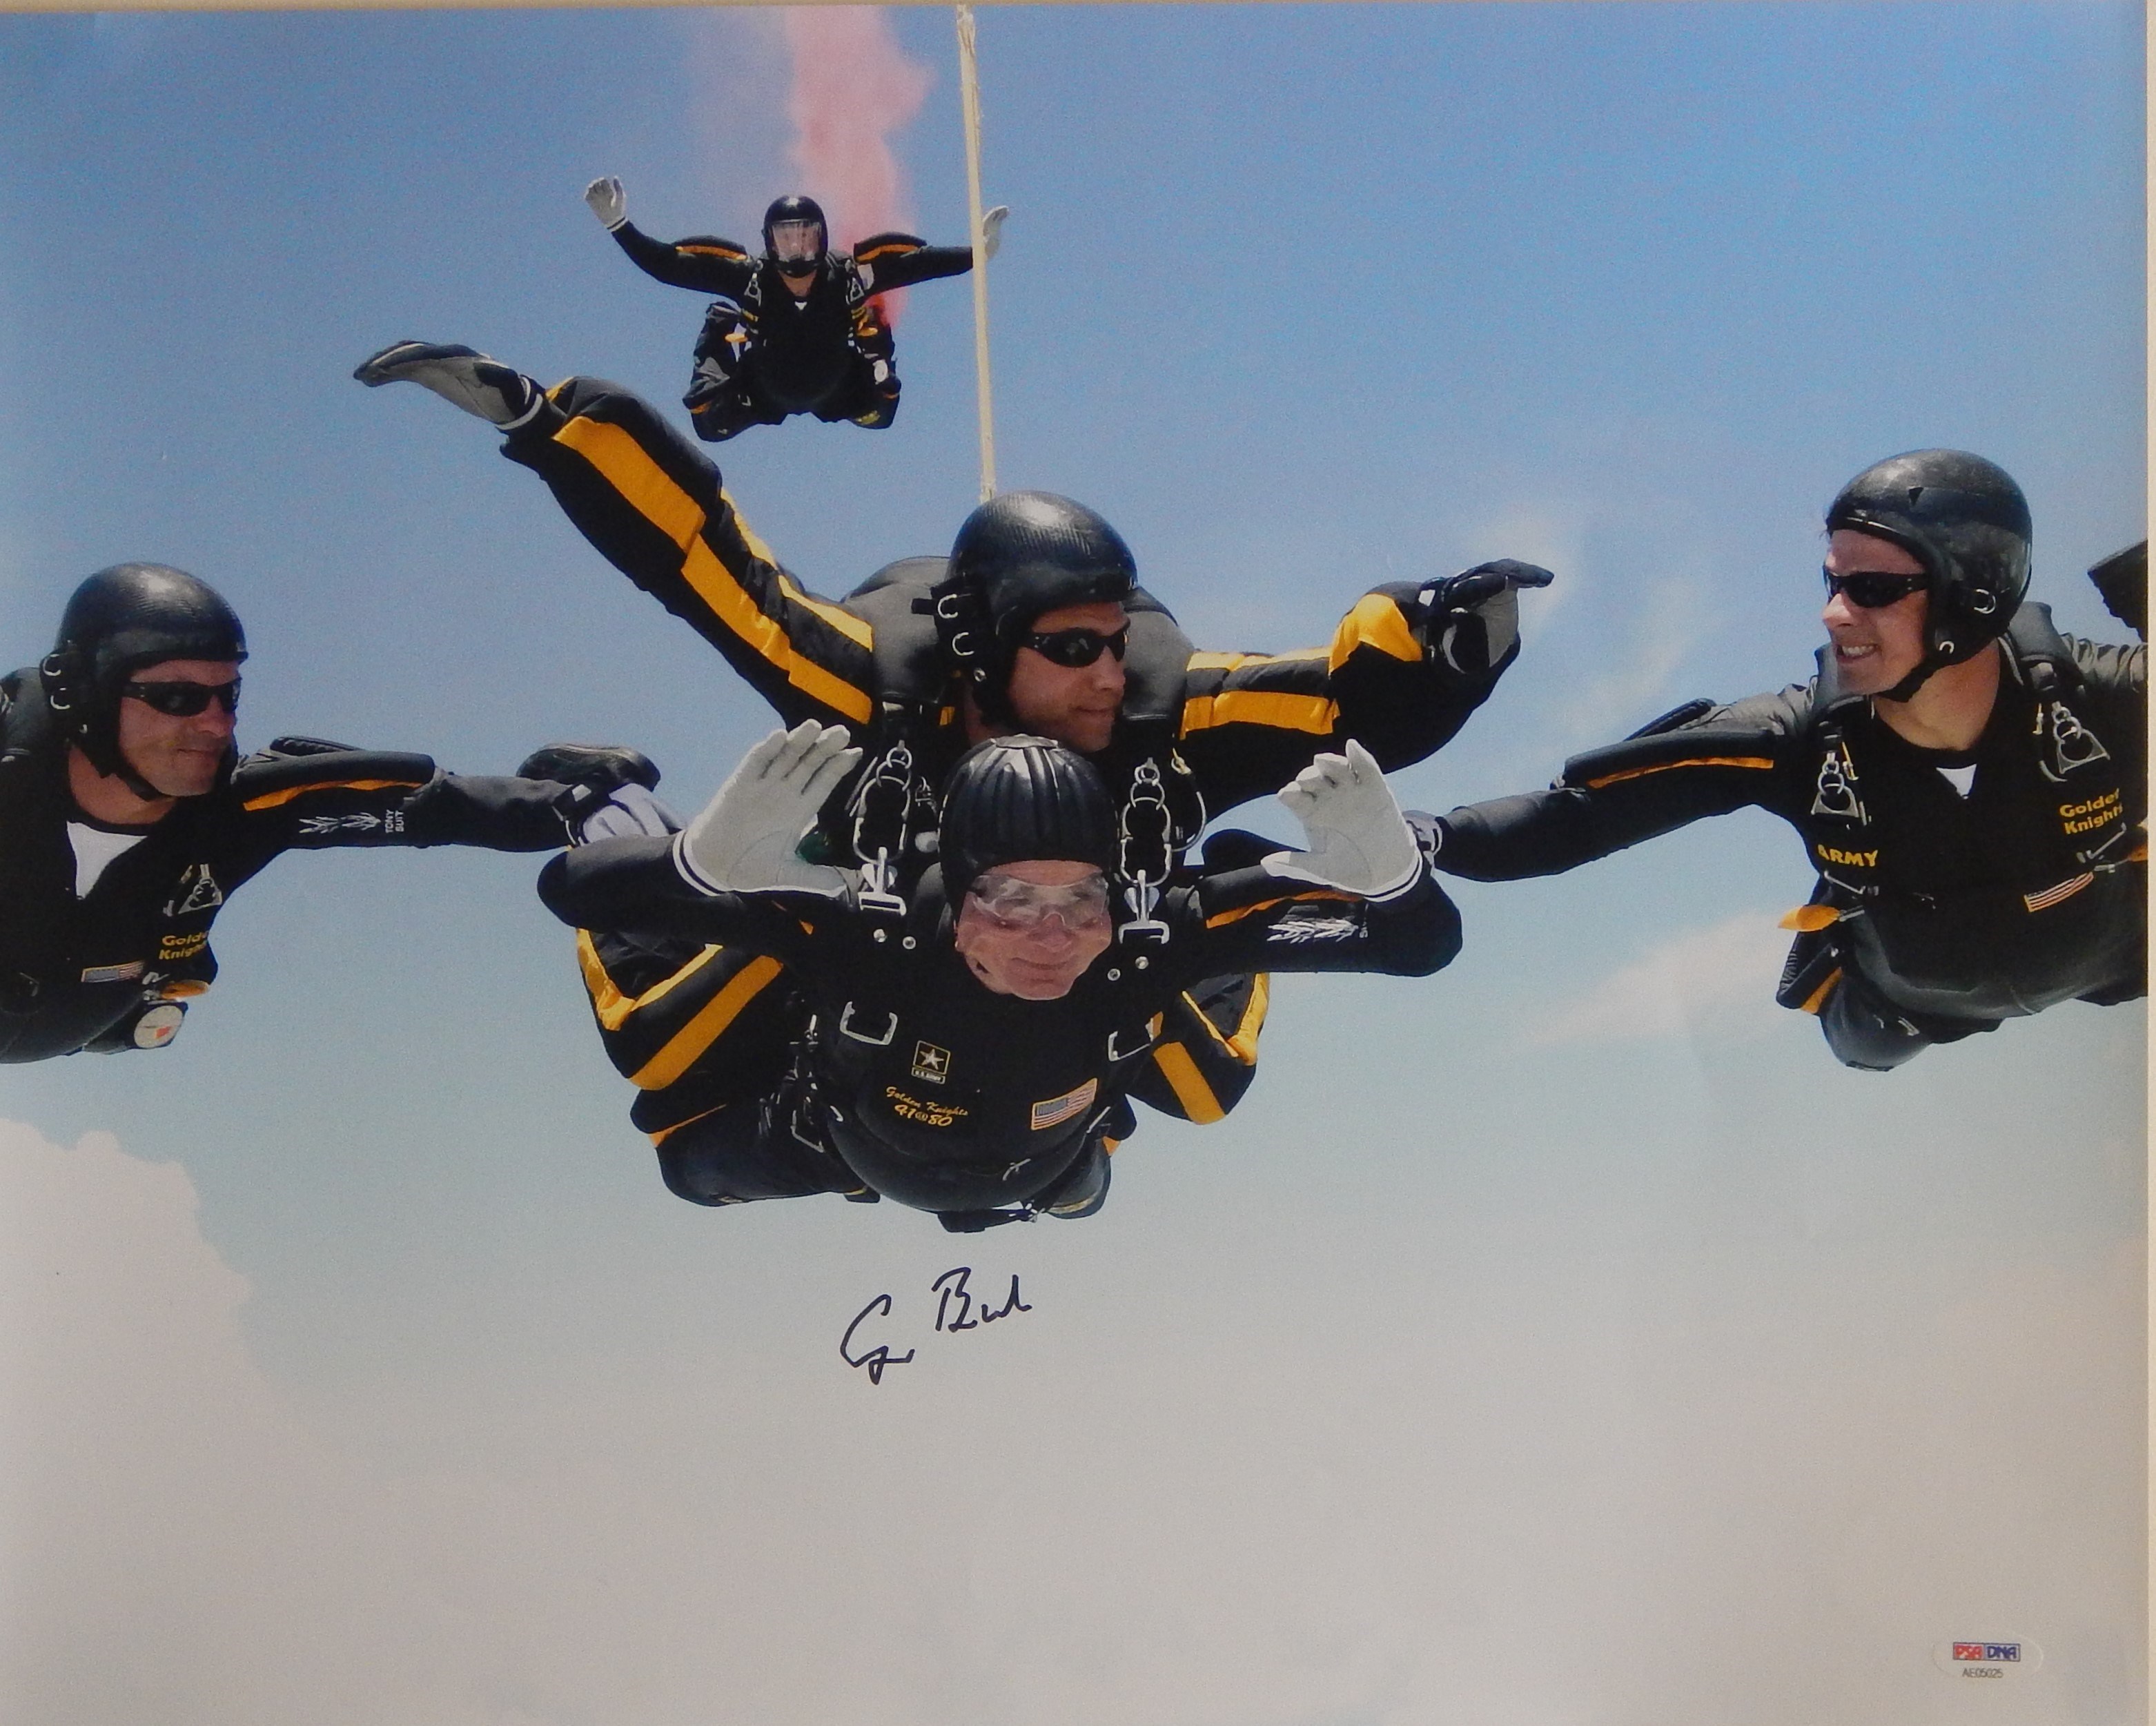 Presidential - President George H.W. Bush 16x20" Signed Skydiving Photo (PSA/DNA LOA)